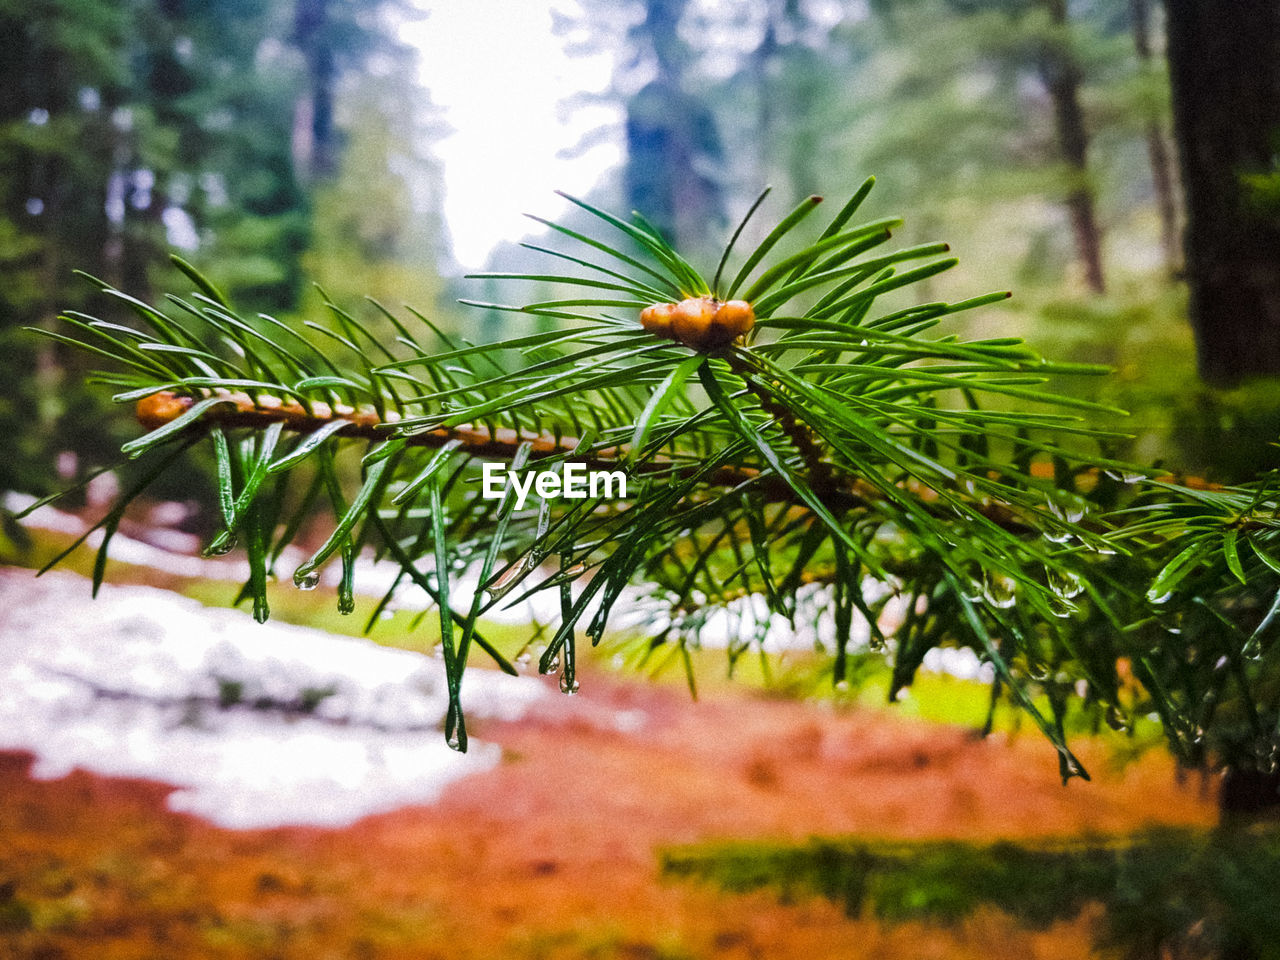 CLOSE-UP OF PINE TREE WITH PLANTS